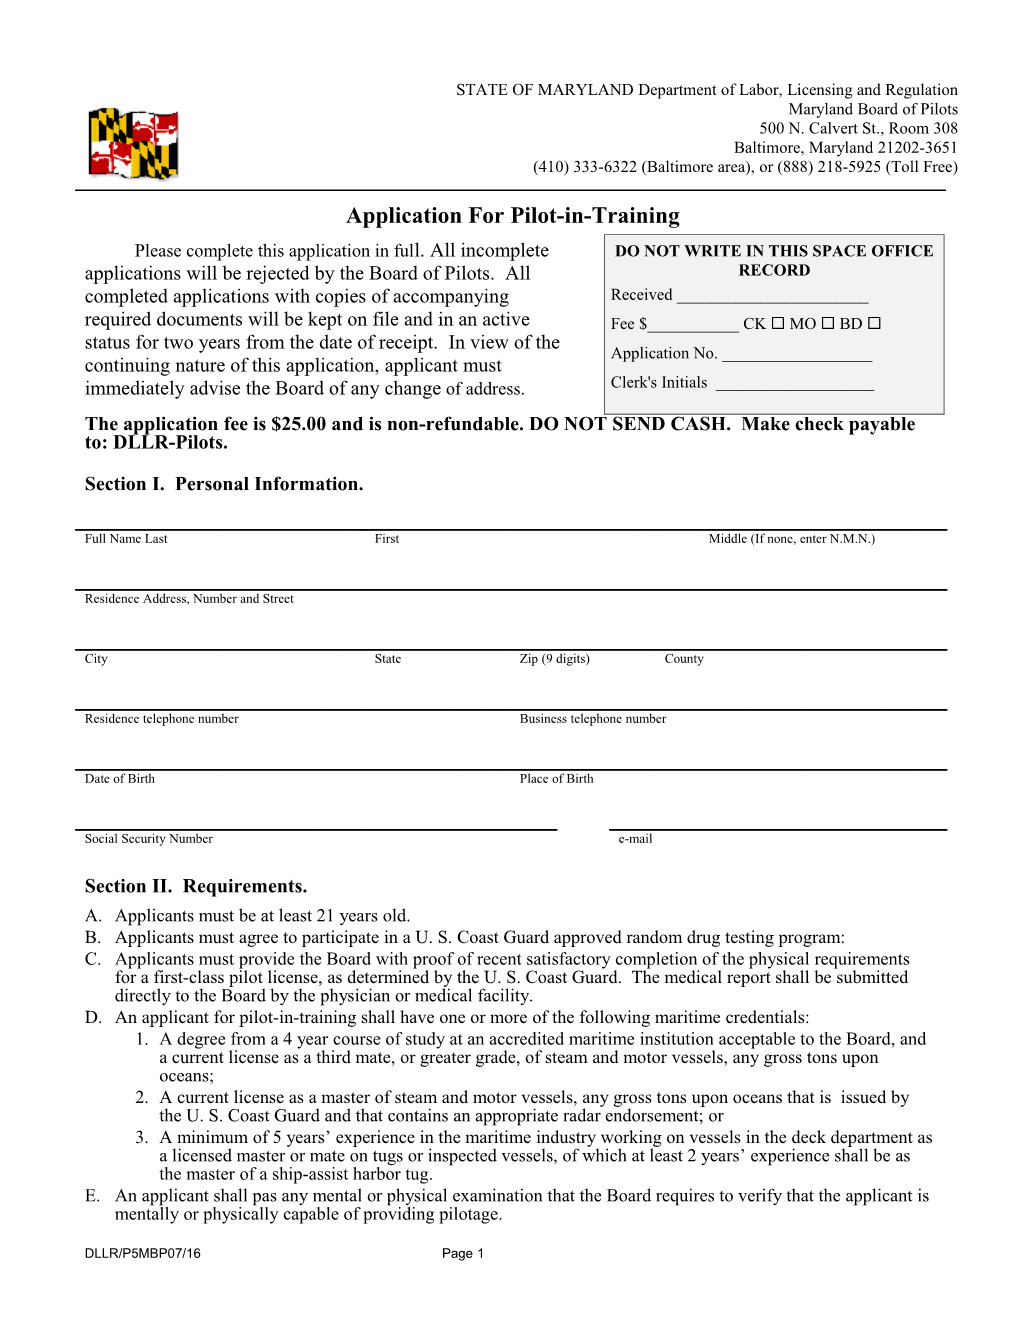 Please Complete This Application in Full. All Incomplete